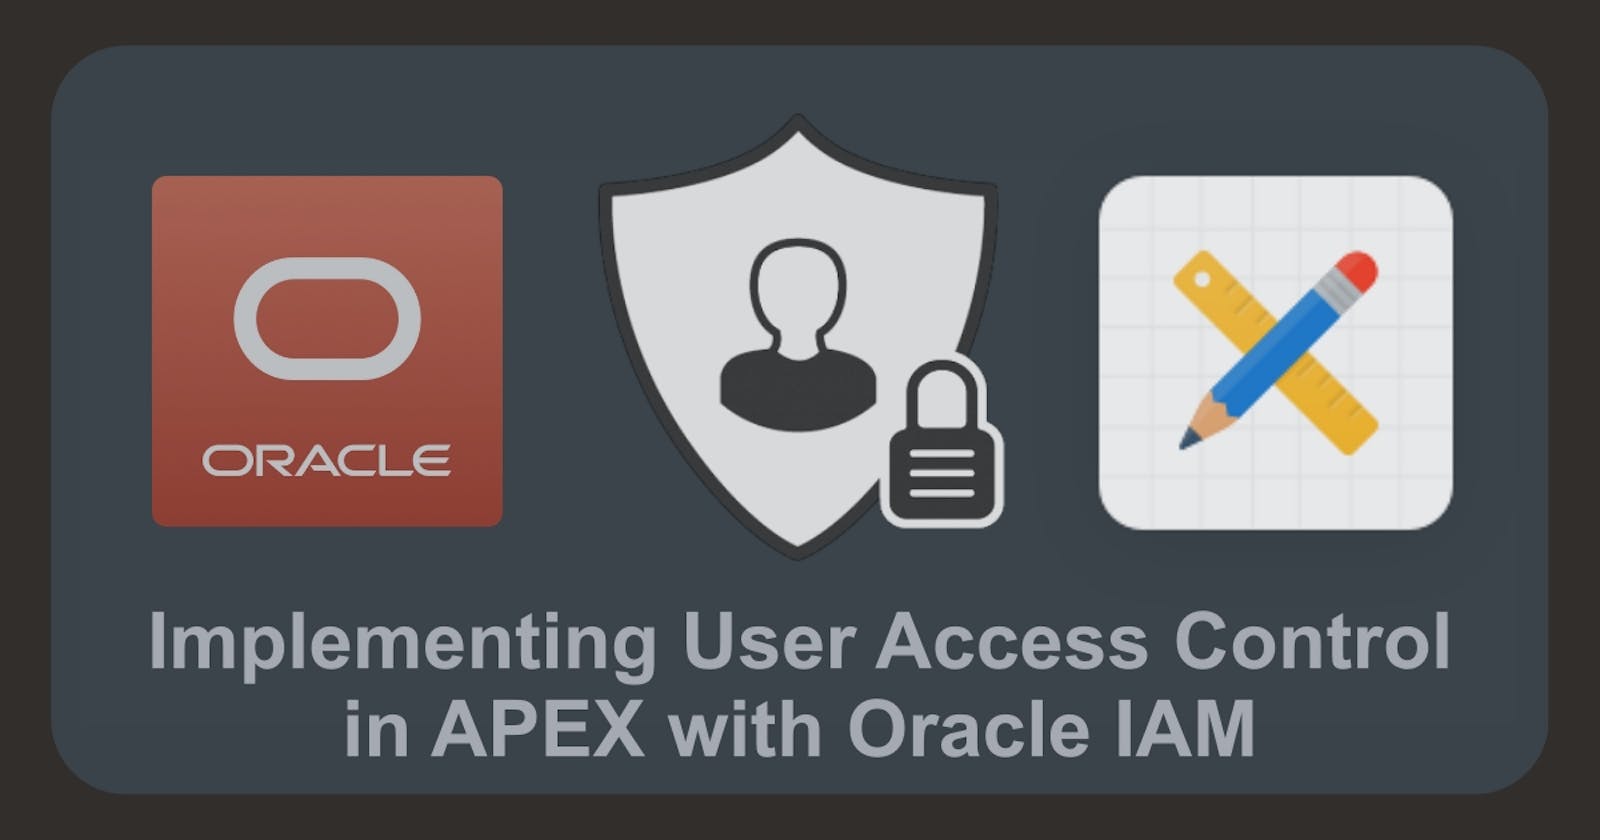 Implementing User Access Control in APEX with Oracle Identity and Access Management